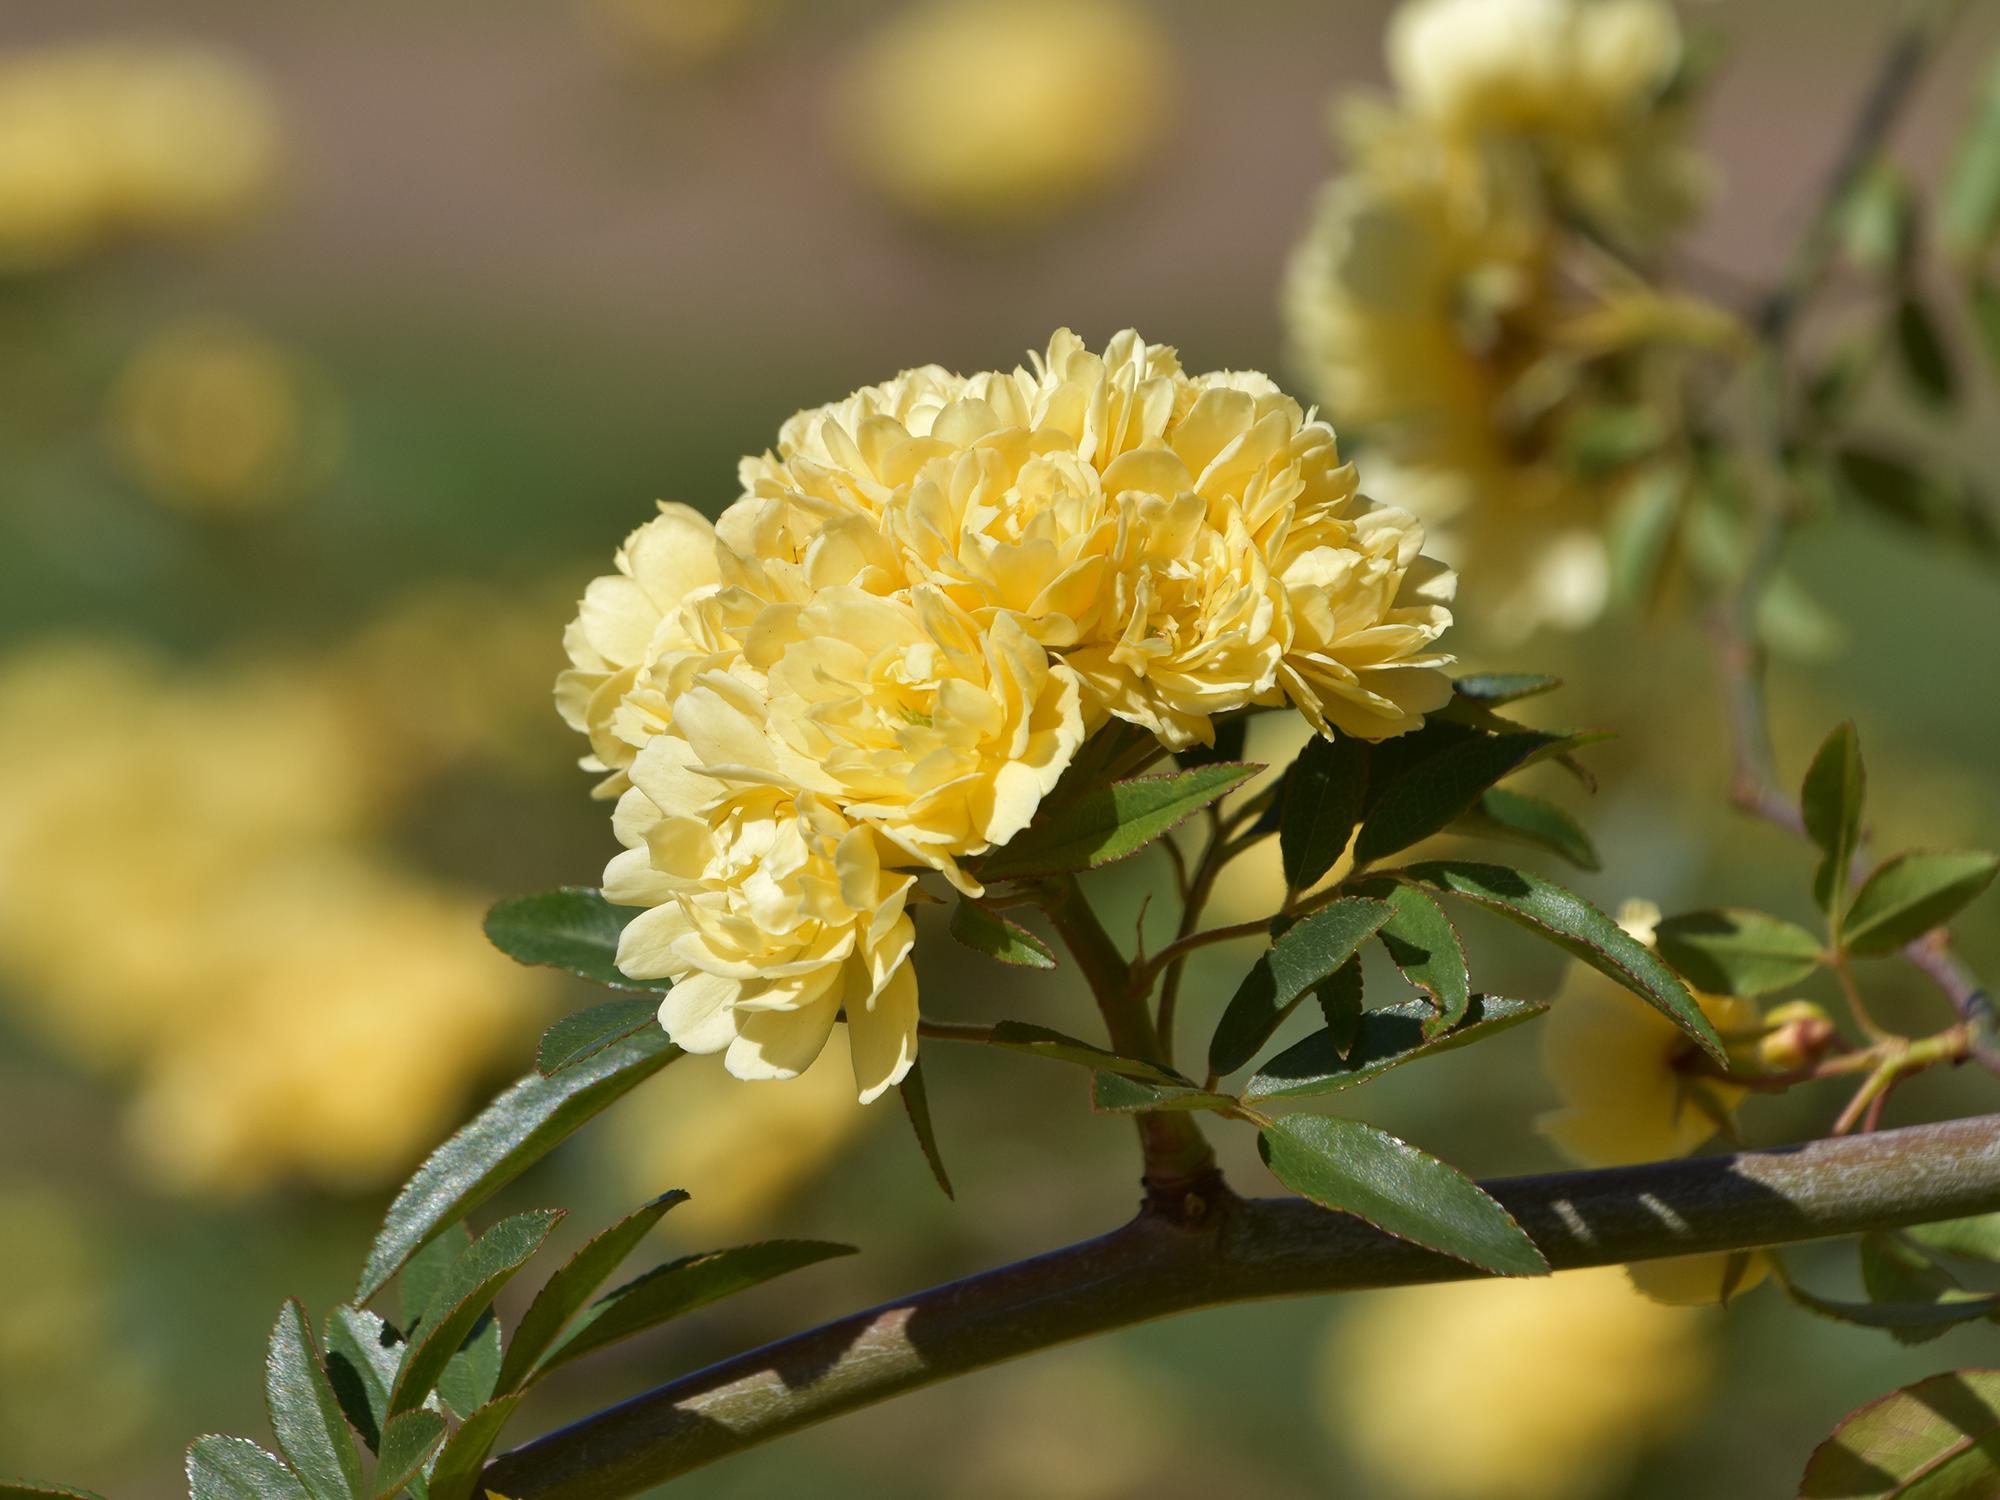 Although common in Southern landscapes, the Lady Banks rose dates back to the late 1790s and came from China. (Photo by MSU Extension/Gary Bachman)